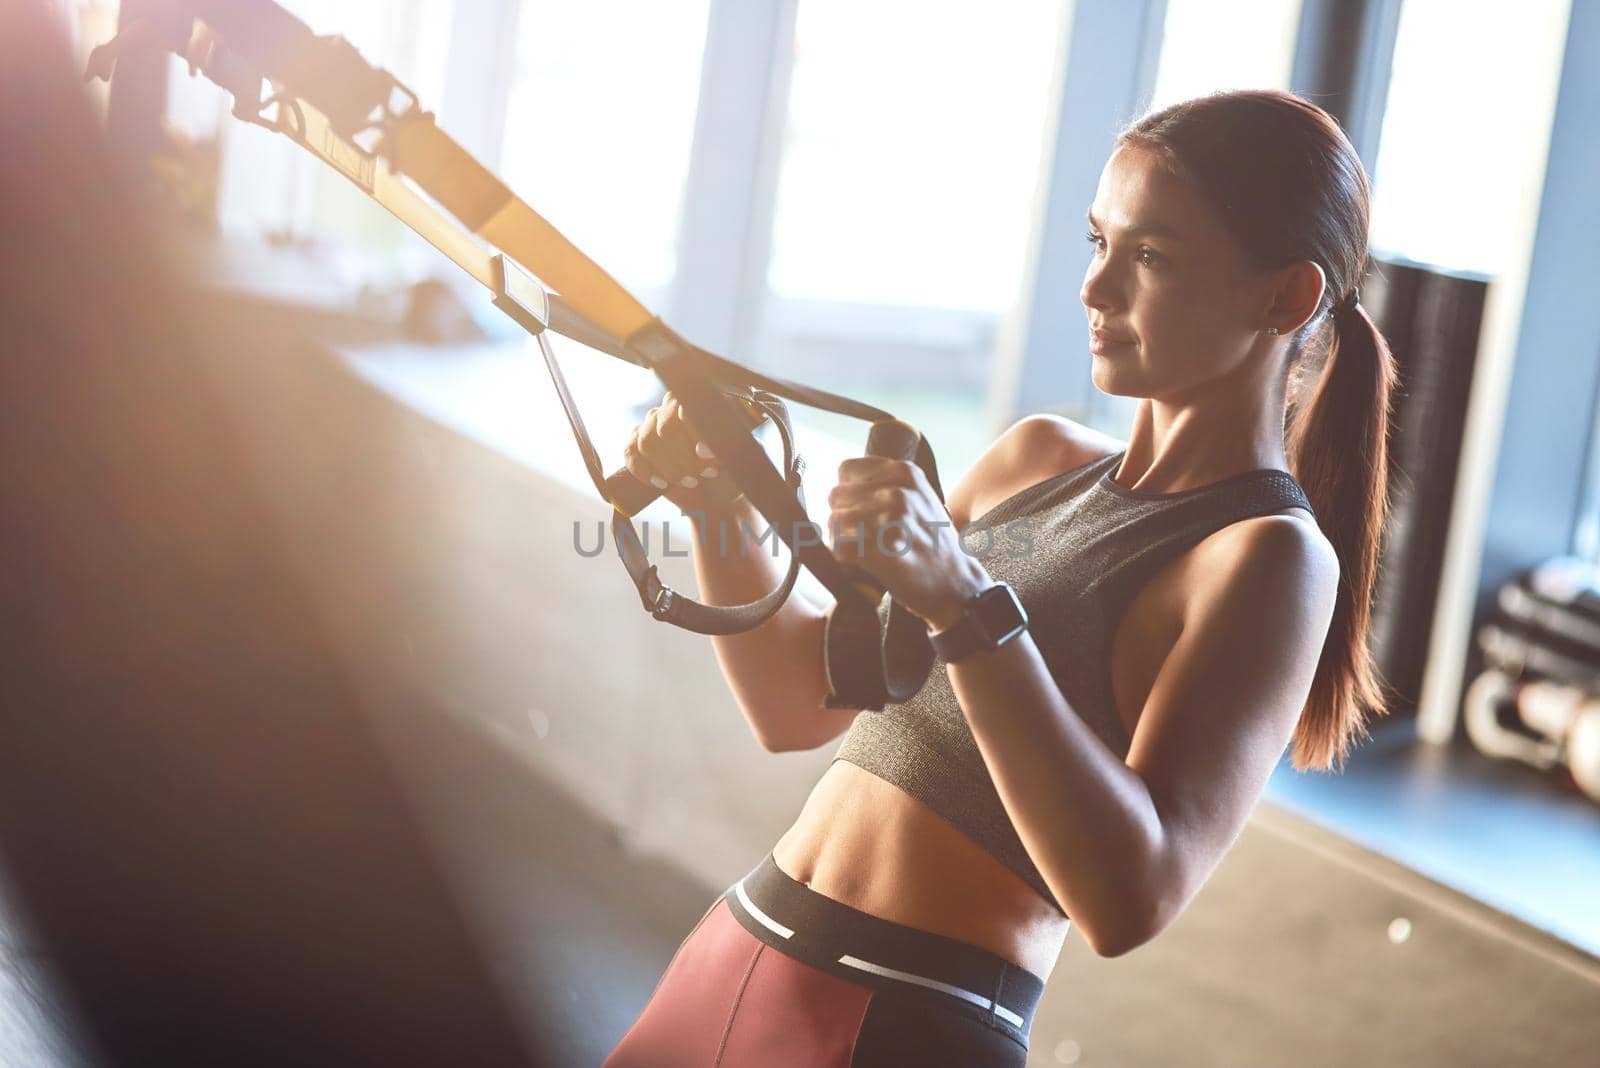 Side view of a young strong and fit woman exercising with fitness trx straps at gym. Sport, workout, wellness and healthy lifestyle